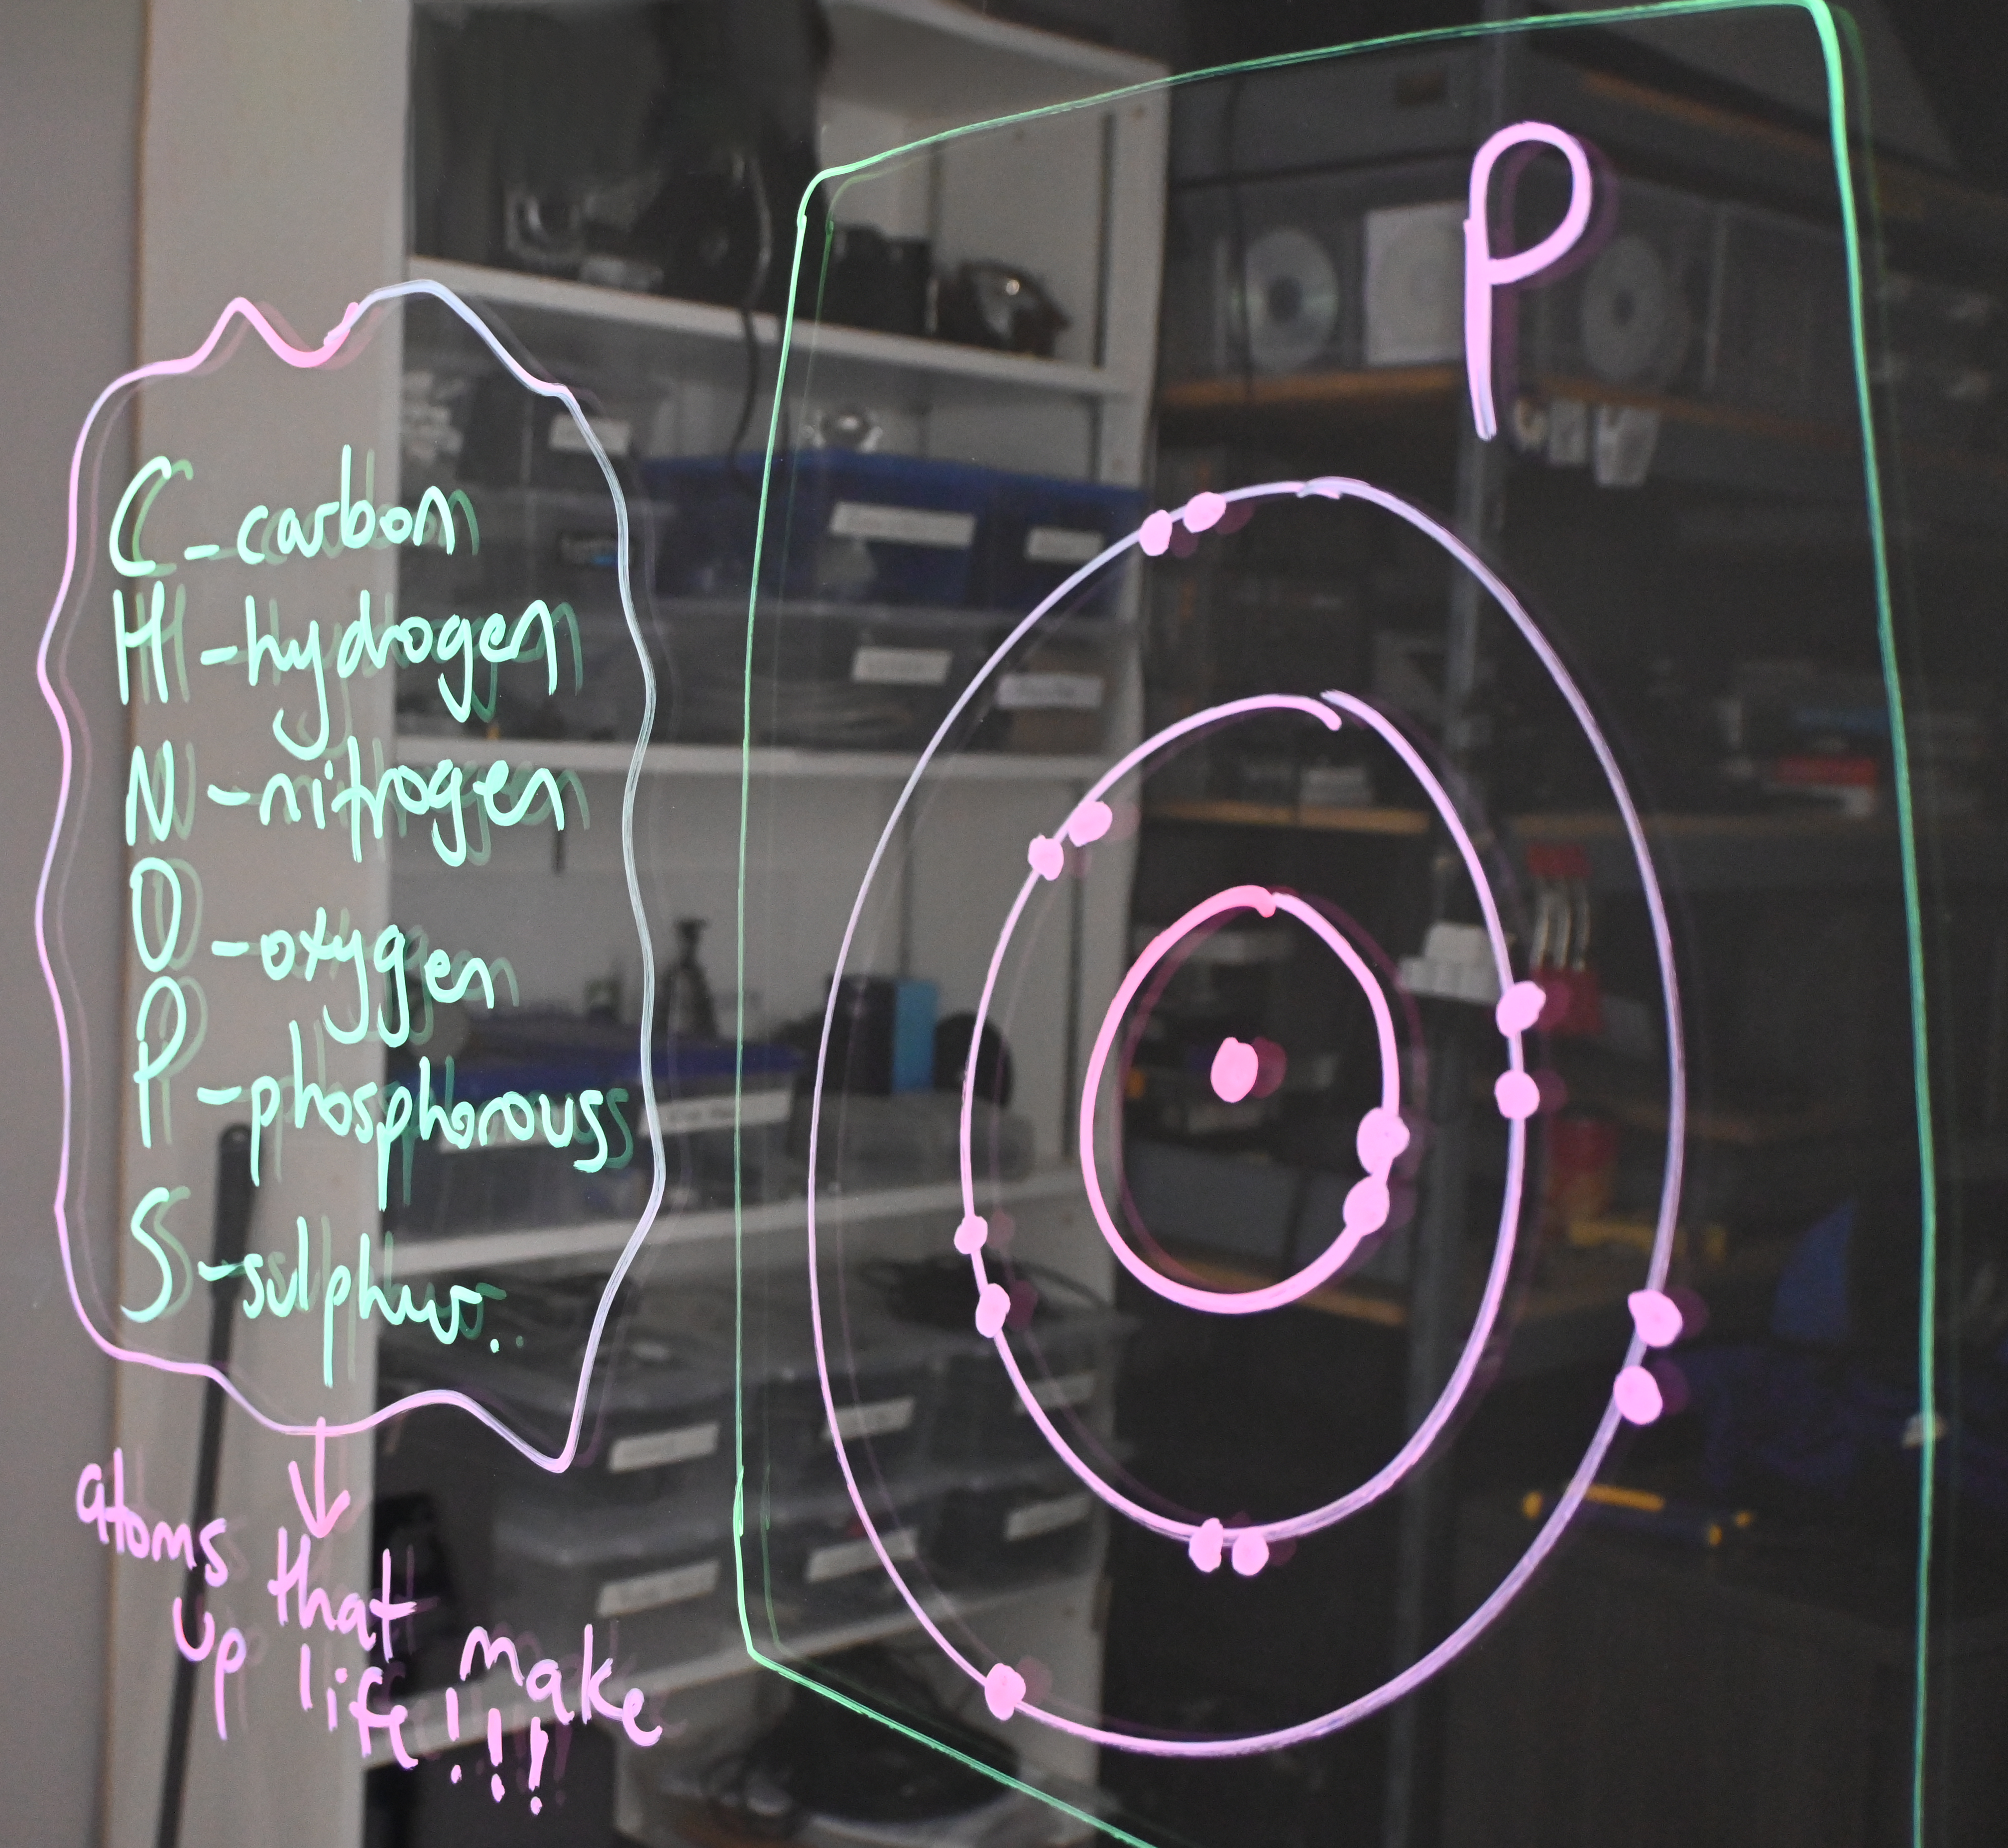 Writing on a light board shows a Bohr model of phosphorus lists the six elements that make up life. These elements are carbon, hydrogen, nitrogen, oxygen, phosphorus, and sulphur.